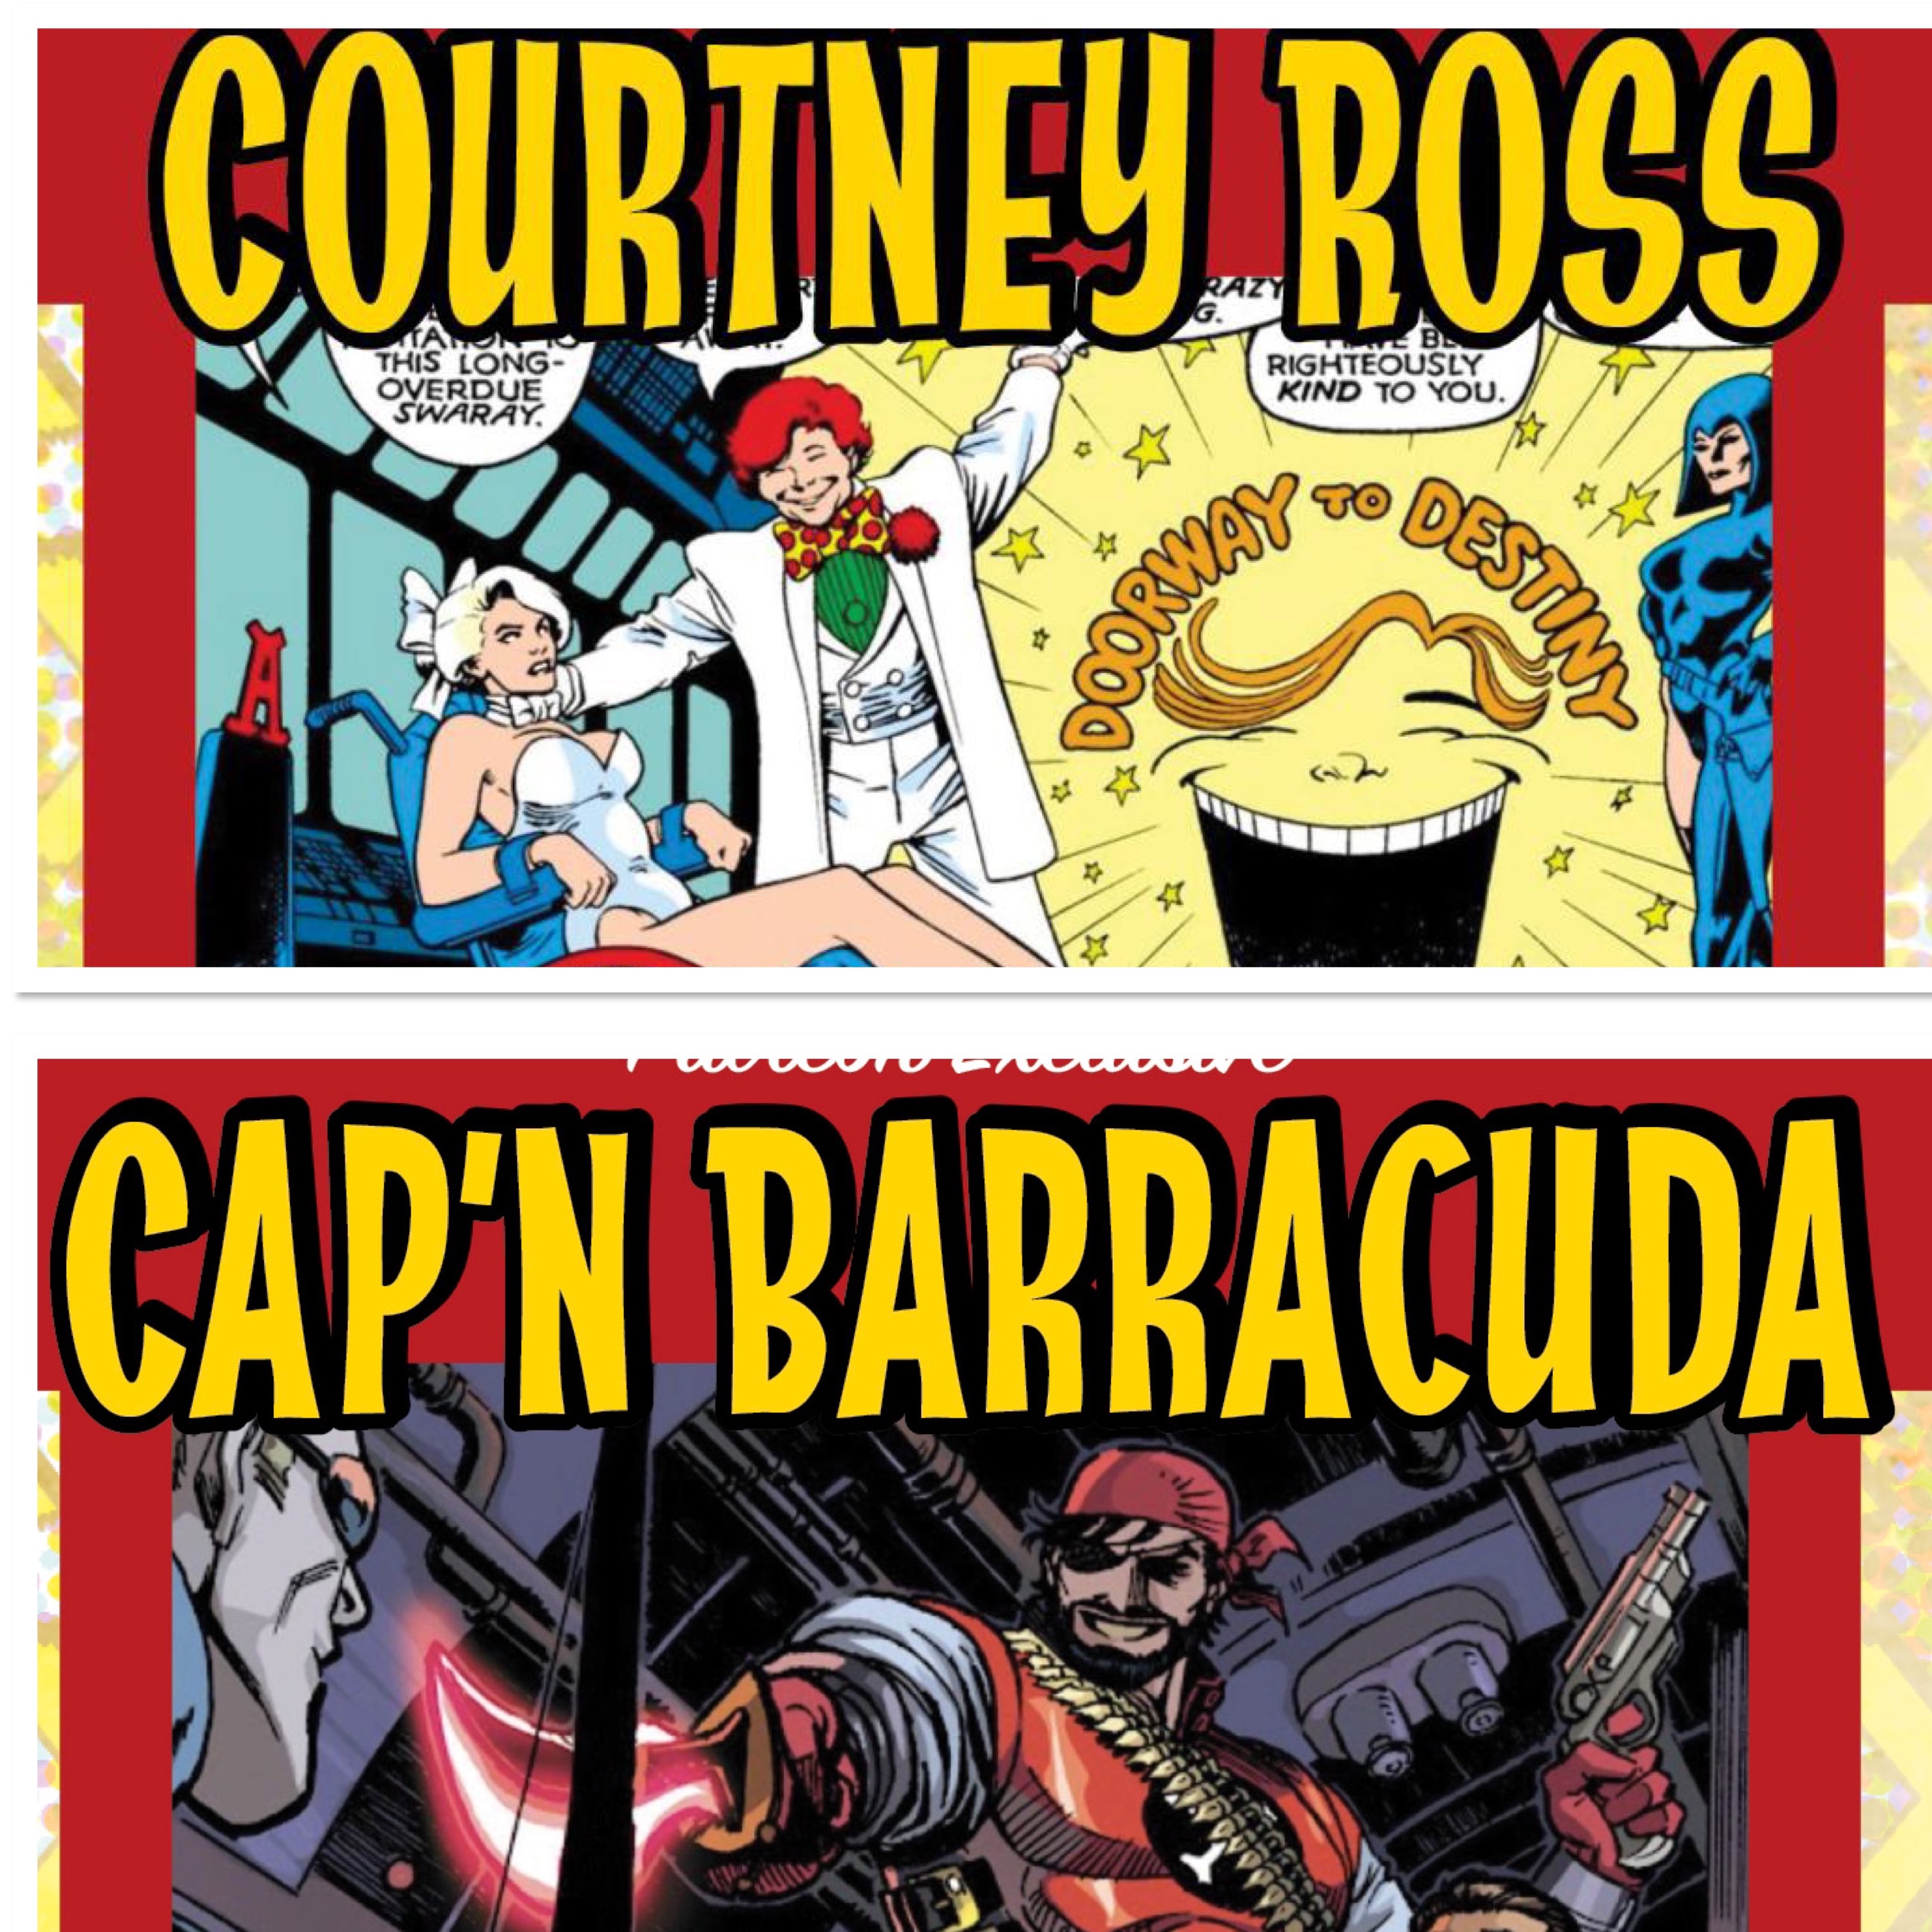 Double Bonus Patreon Release! Courtney Ross with Andrew Deman and Michelle Waffel! Then Cap'n Barracuda! With Markisan Naso!